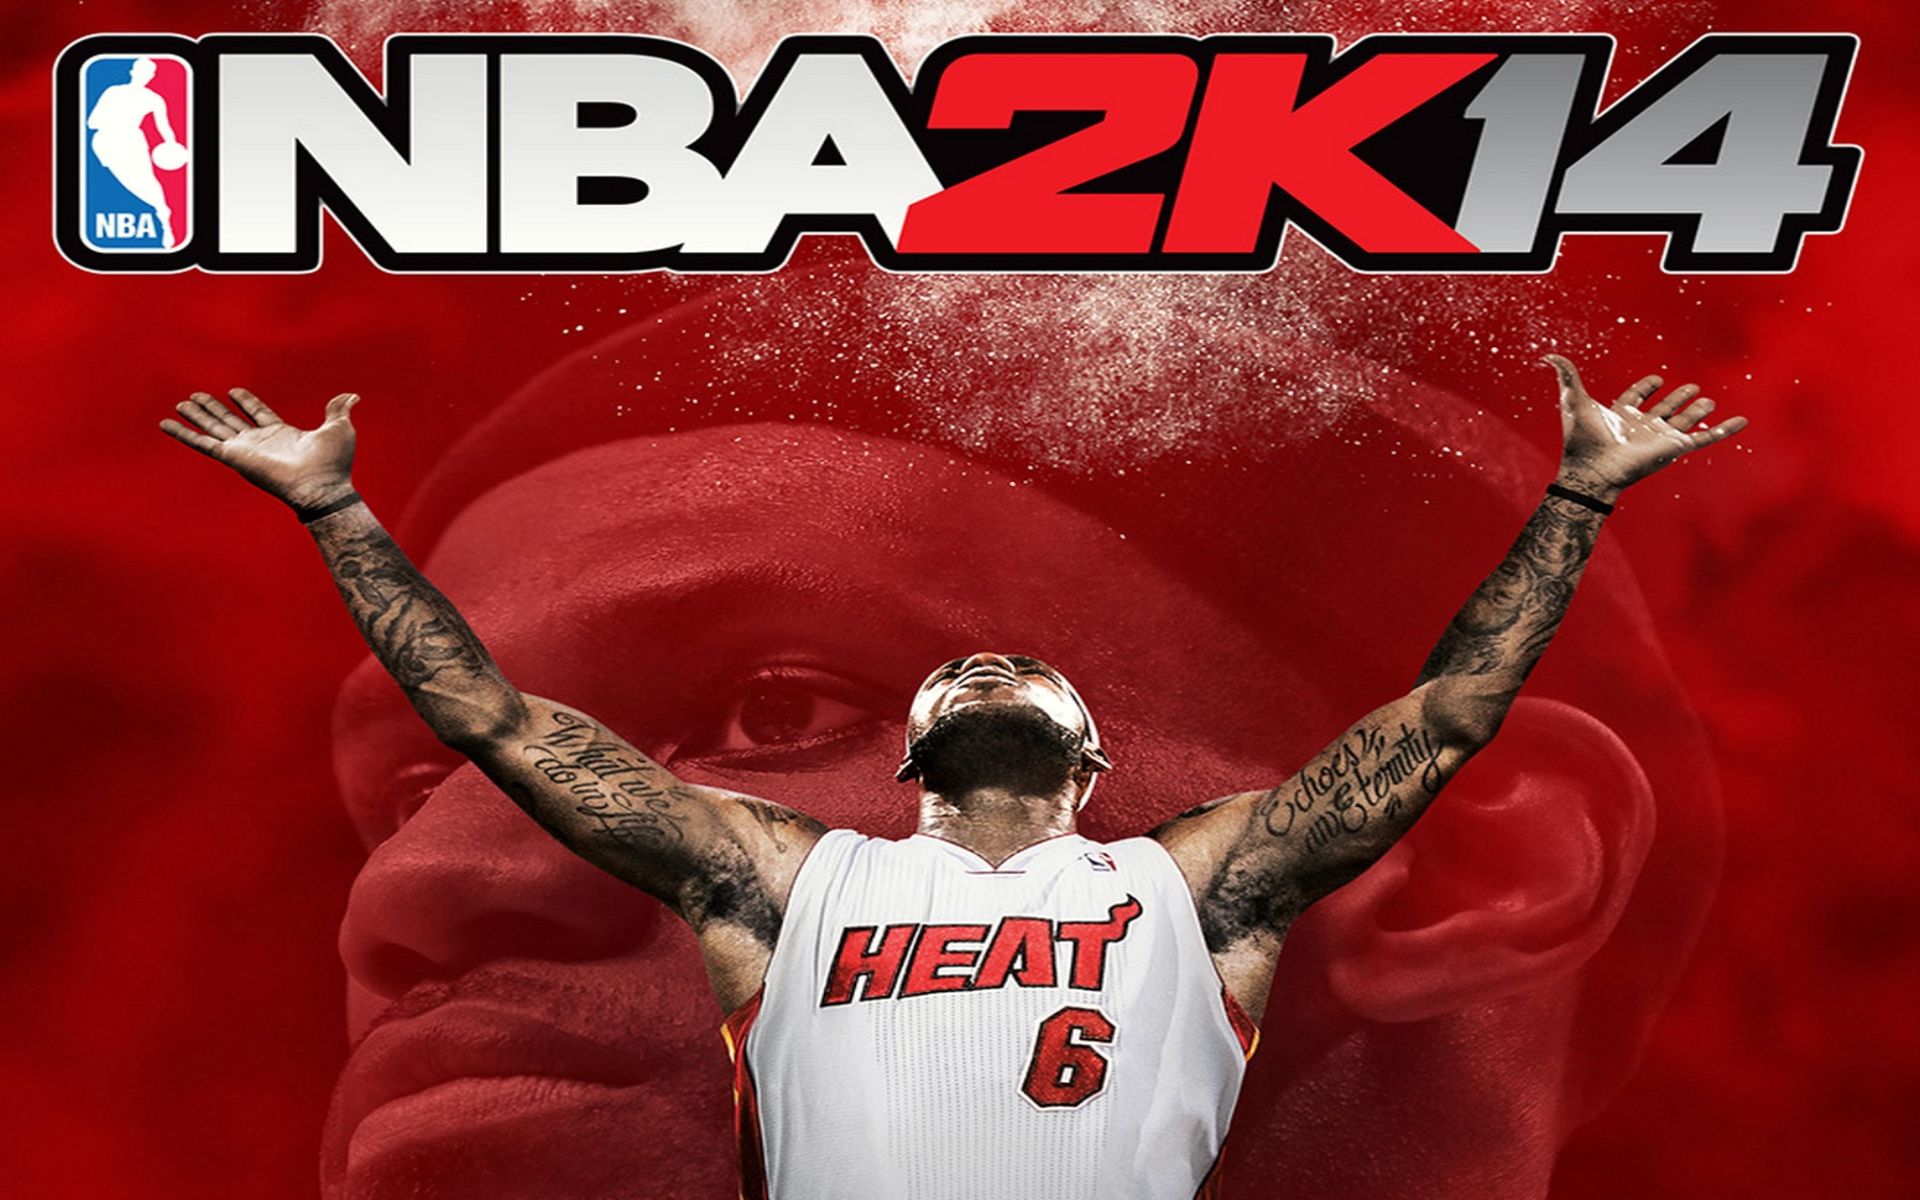 how to download nba 2k14 for pc